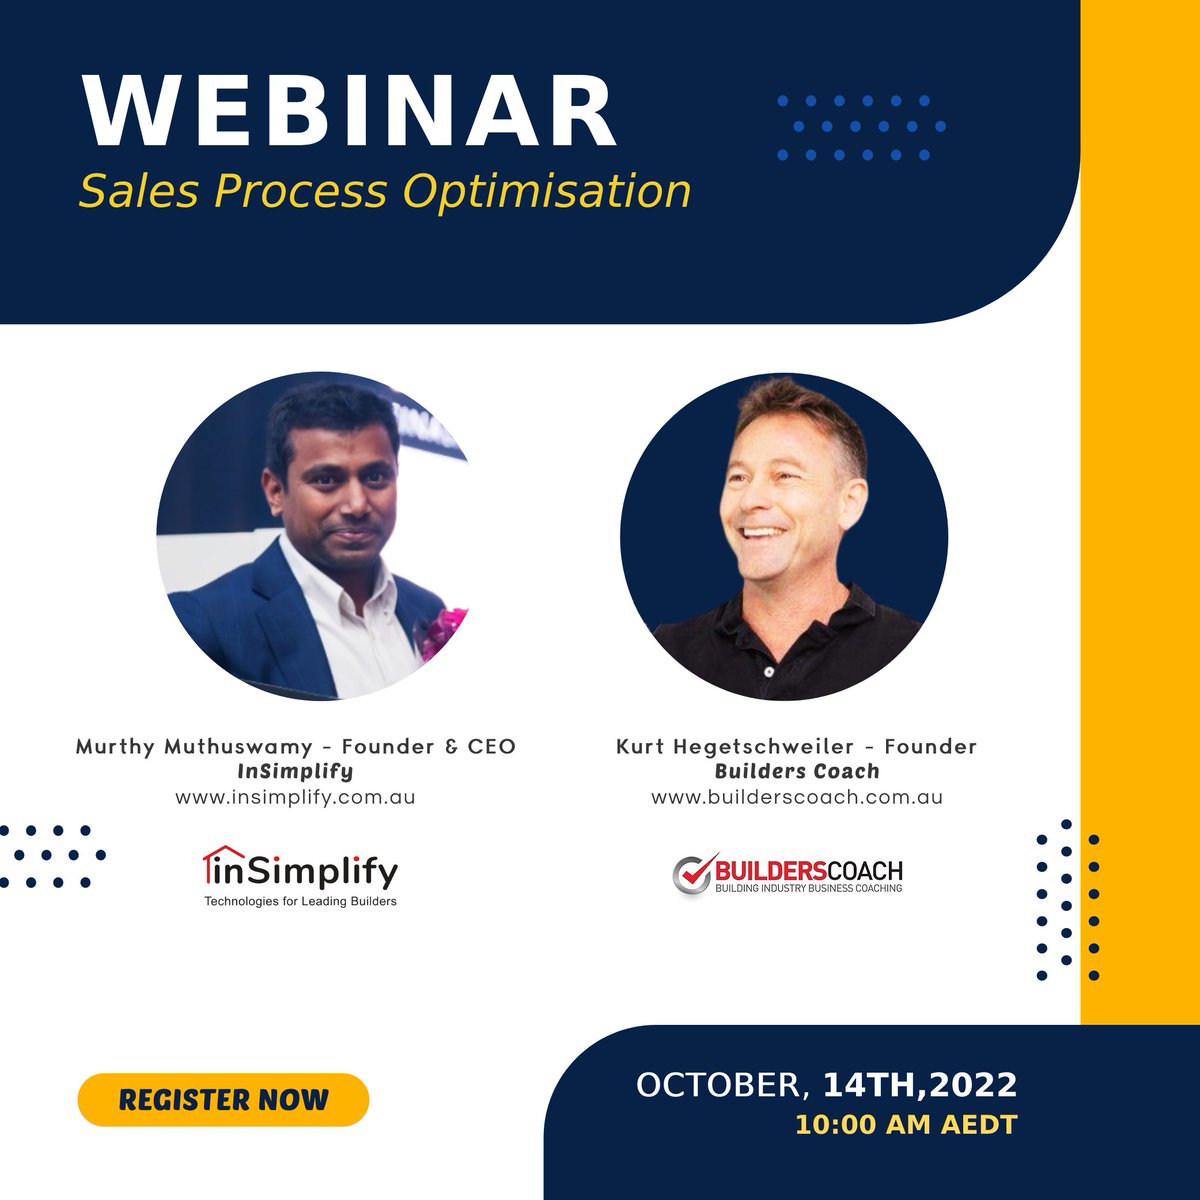 InSimplify & Builders Coach - Sales Process Optimisation Webinar for Builders.
Join us for a webinar on Oct 14, 2022, at 10:00 AM AEDT. Click the link to register for the webinar. 
tinyurl.com/5ew6rvsd
 #salesprocessOptimization #homebuilders #insimplify #builderscoach